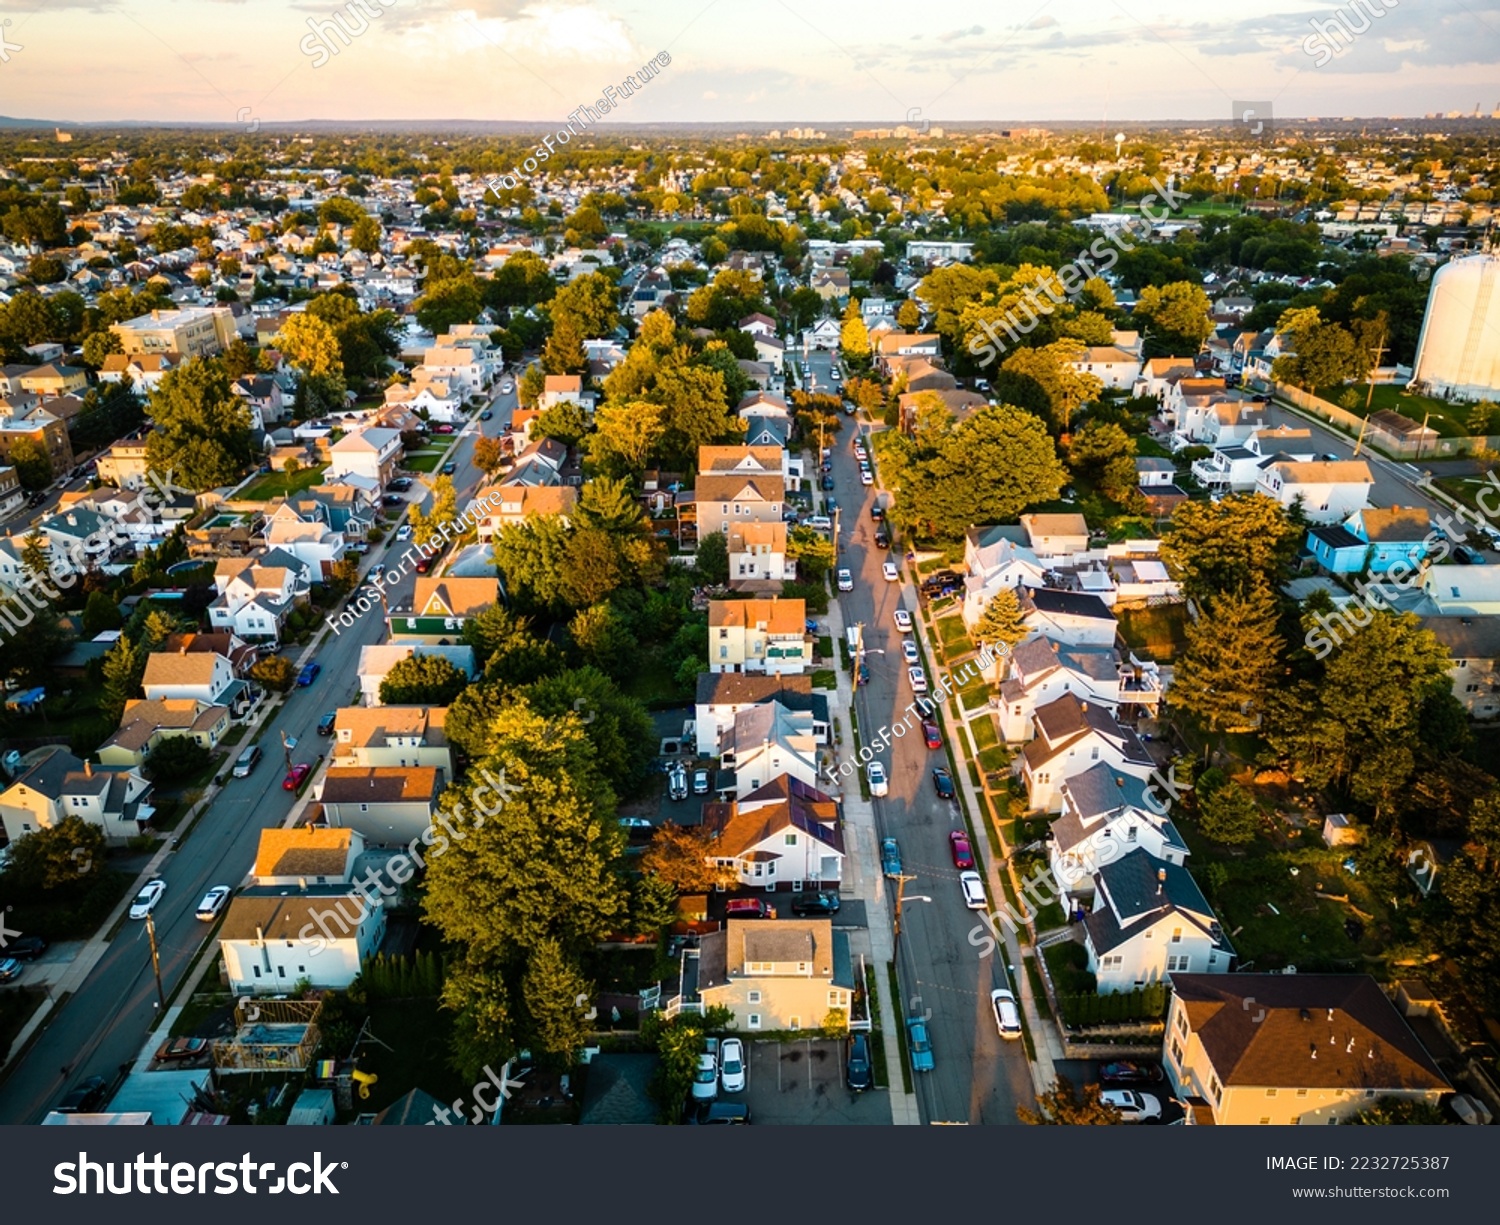 Aerial of Sunset in Garfield New Jersey #2232725387